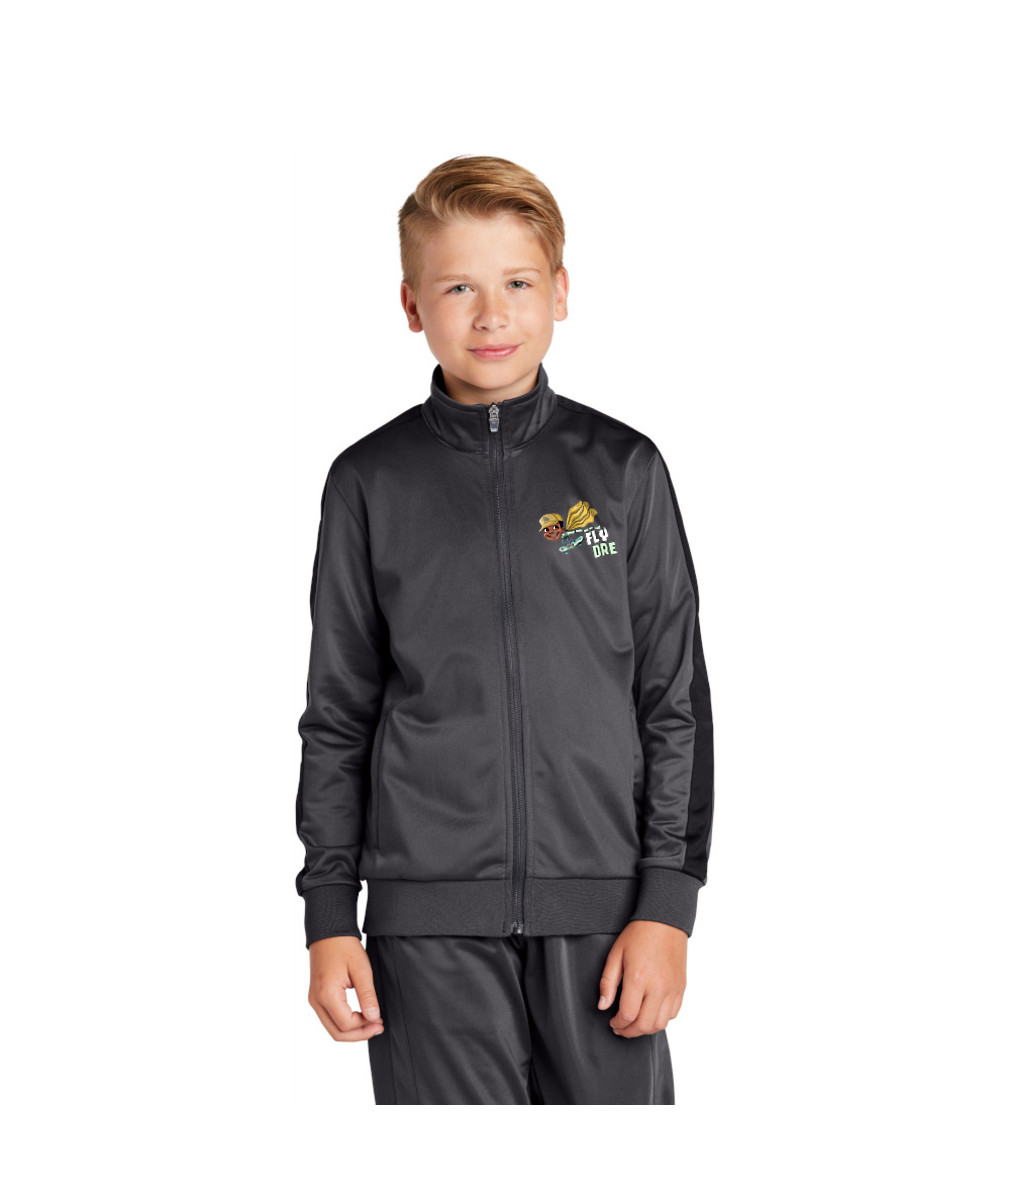 Fly Dre Embroidered Sport-Tek ® Youth Tricot Track Jacket or Similar